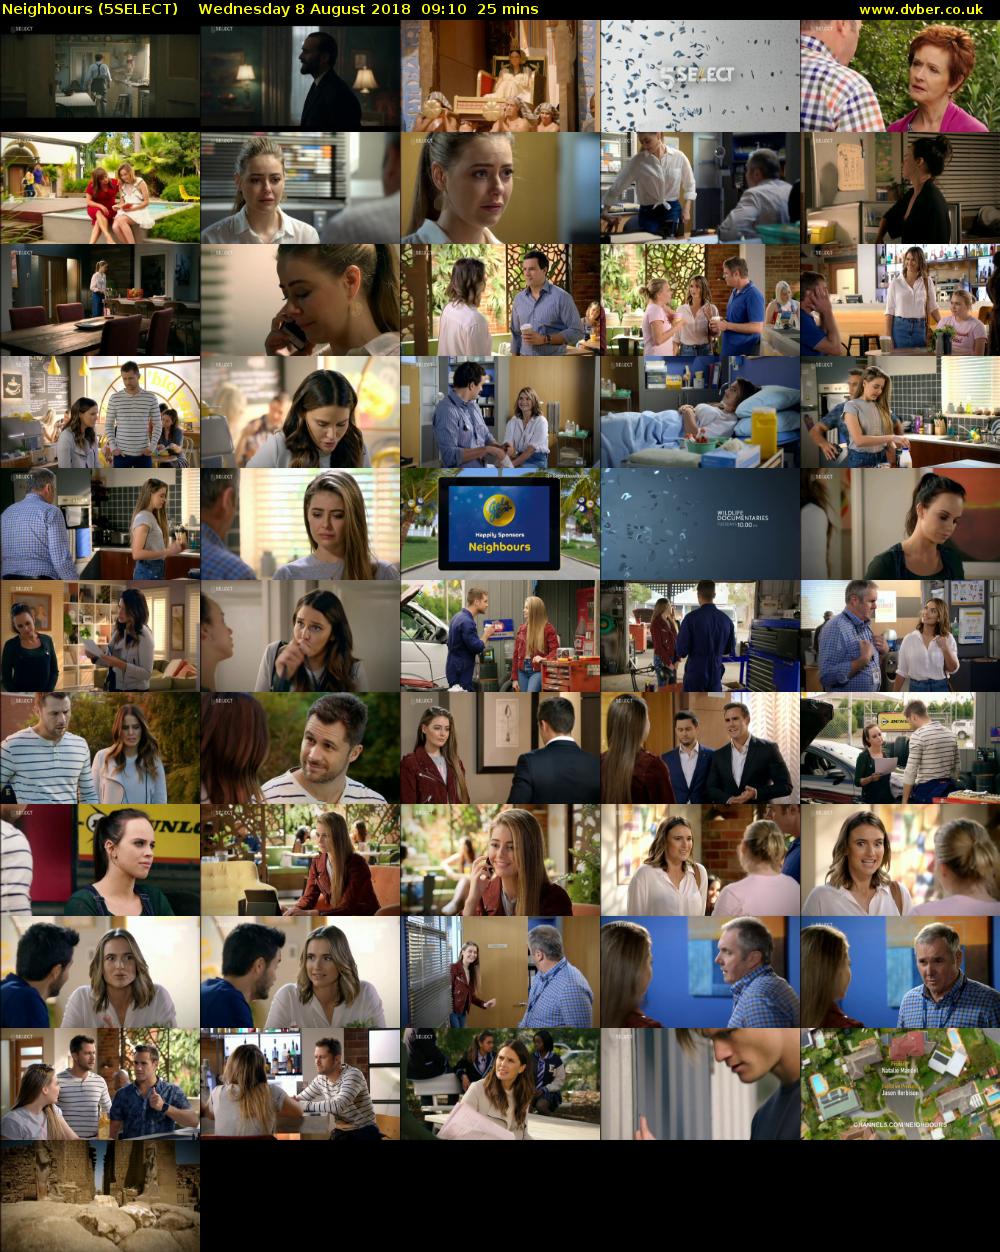 Neighbours (5SELECT) Wednesday 8 August 2018 09:10 - 09:35